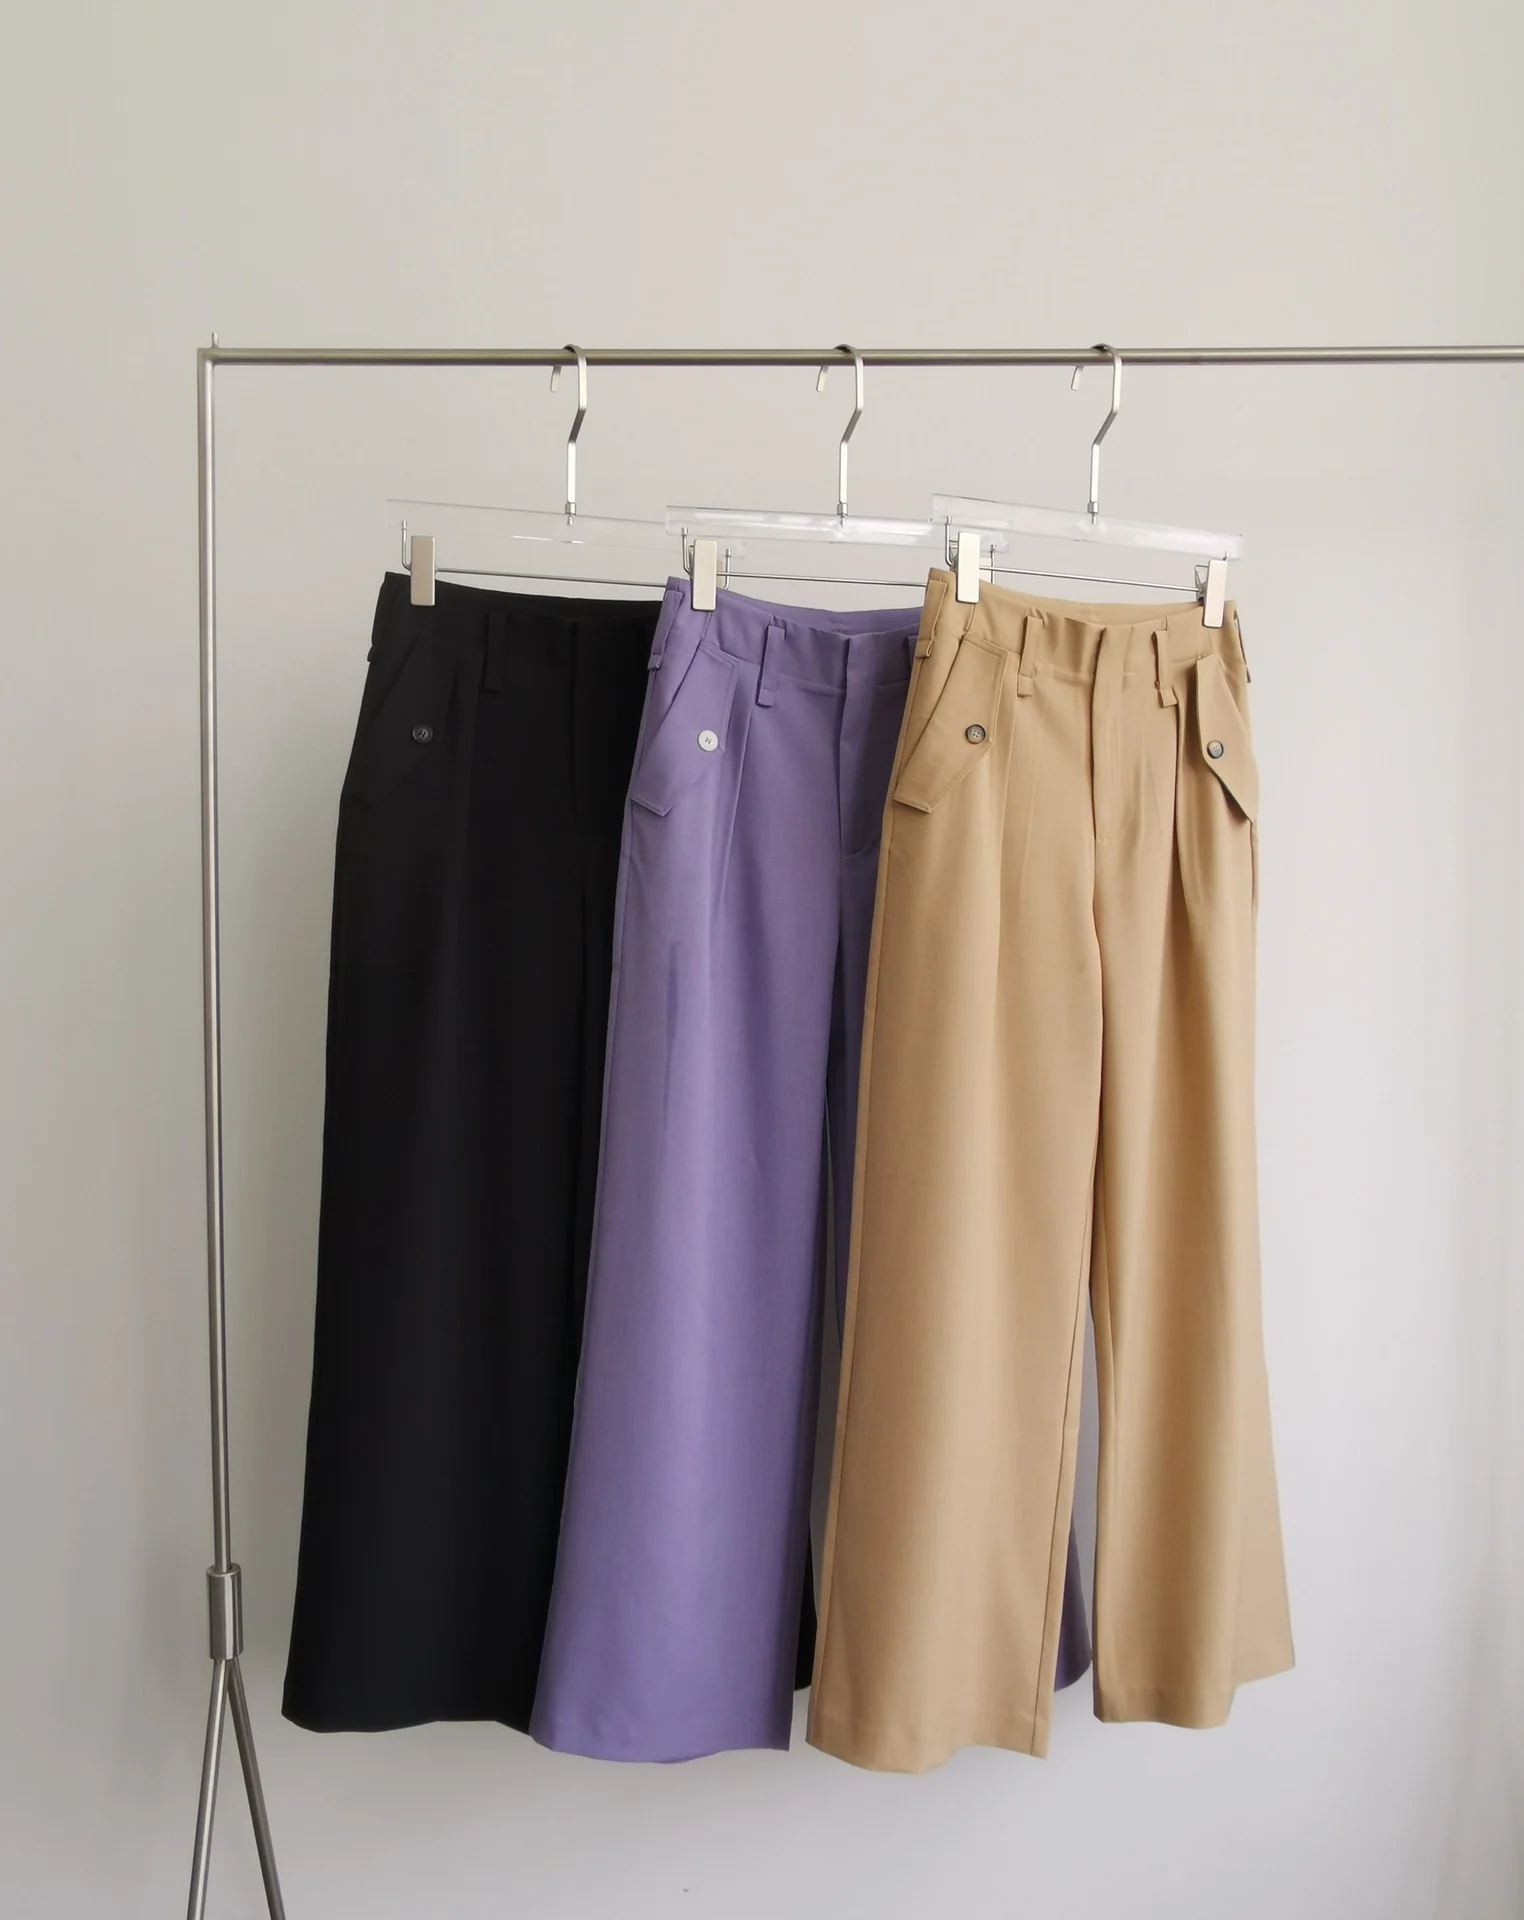 Design sense thin loose straight casual pants whether commuting or everyday easy to wear